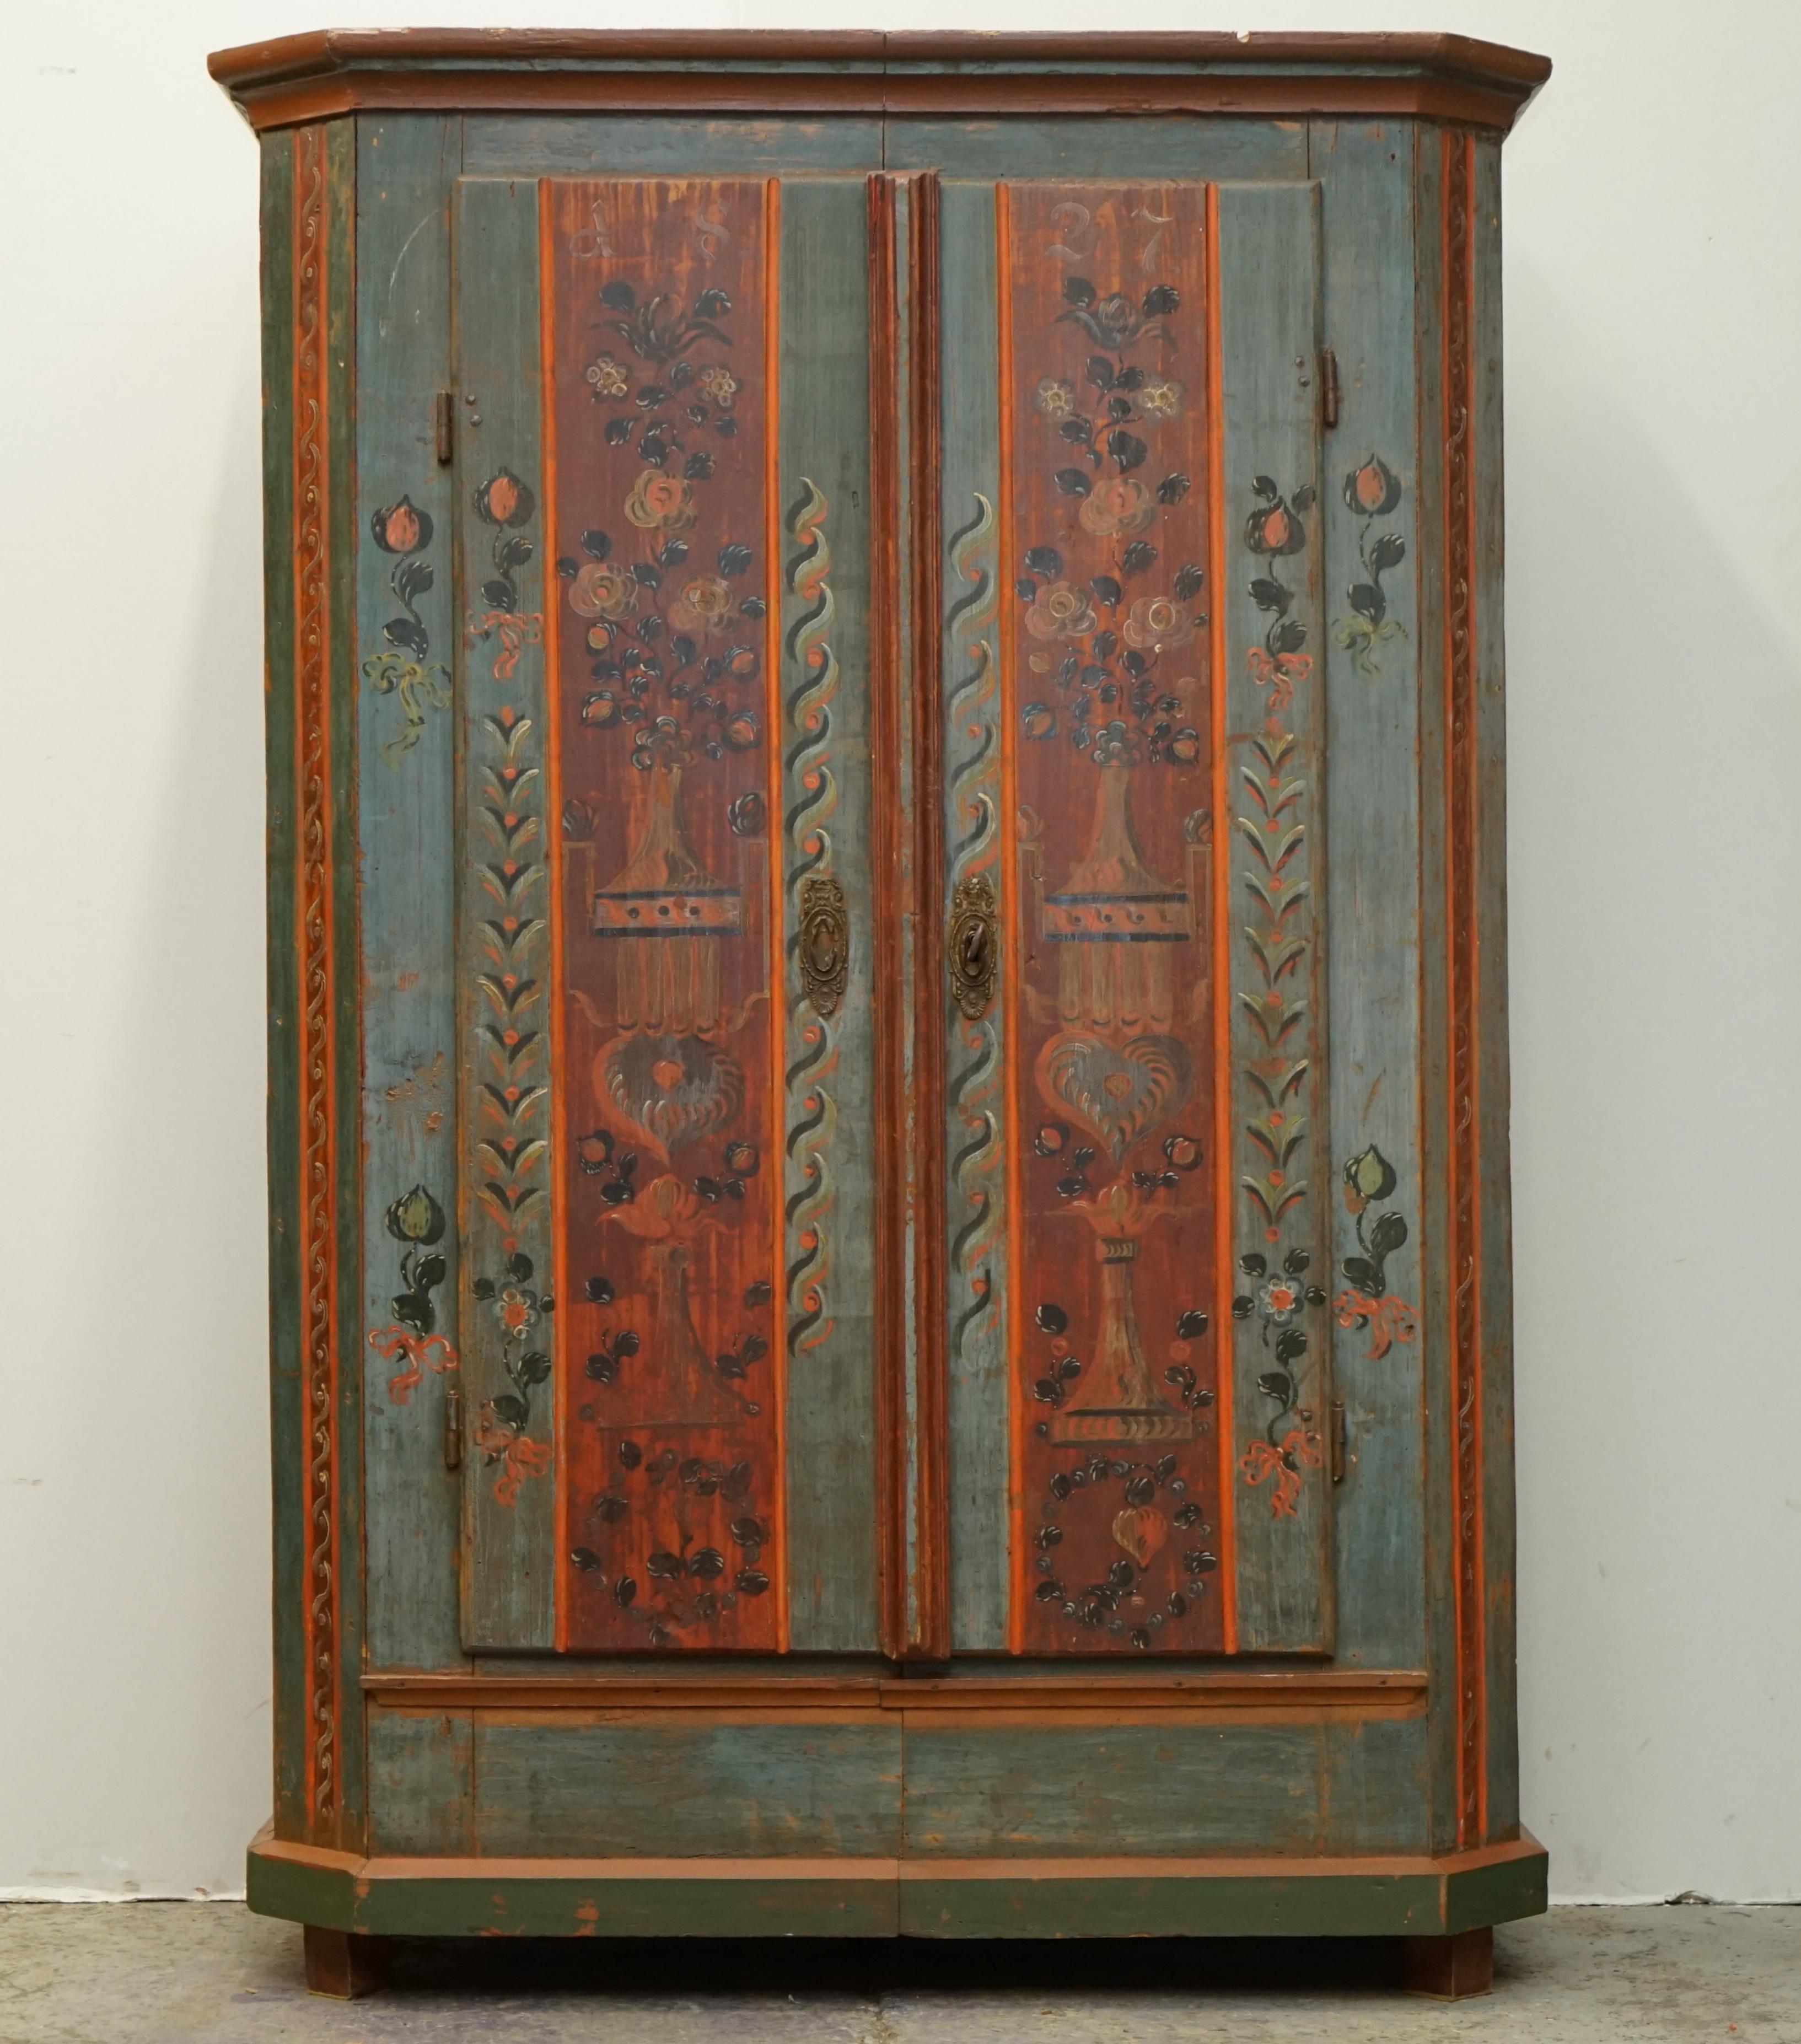 We are delighted to offer for sale this stunning original 1827 dated Antique German Marriage wardrobe in very a rare colour paint that has Love Heart & Floral detailing 

I have recently purchased a very large collection of these original, antique